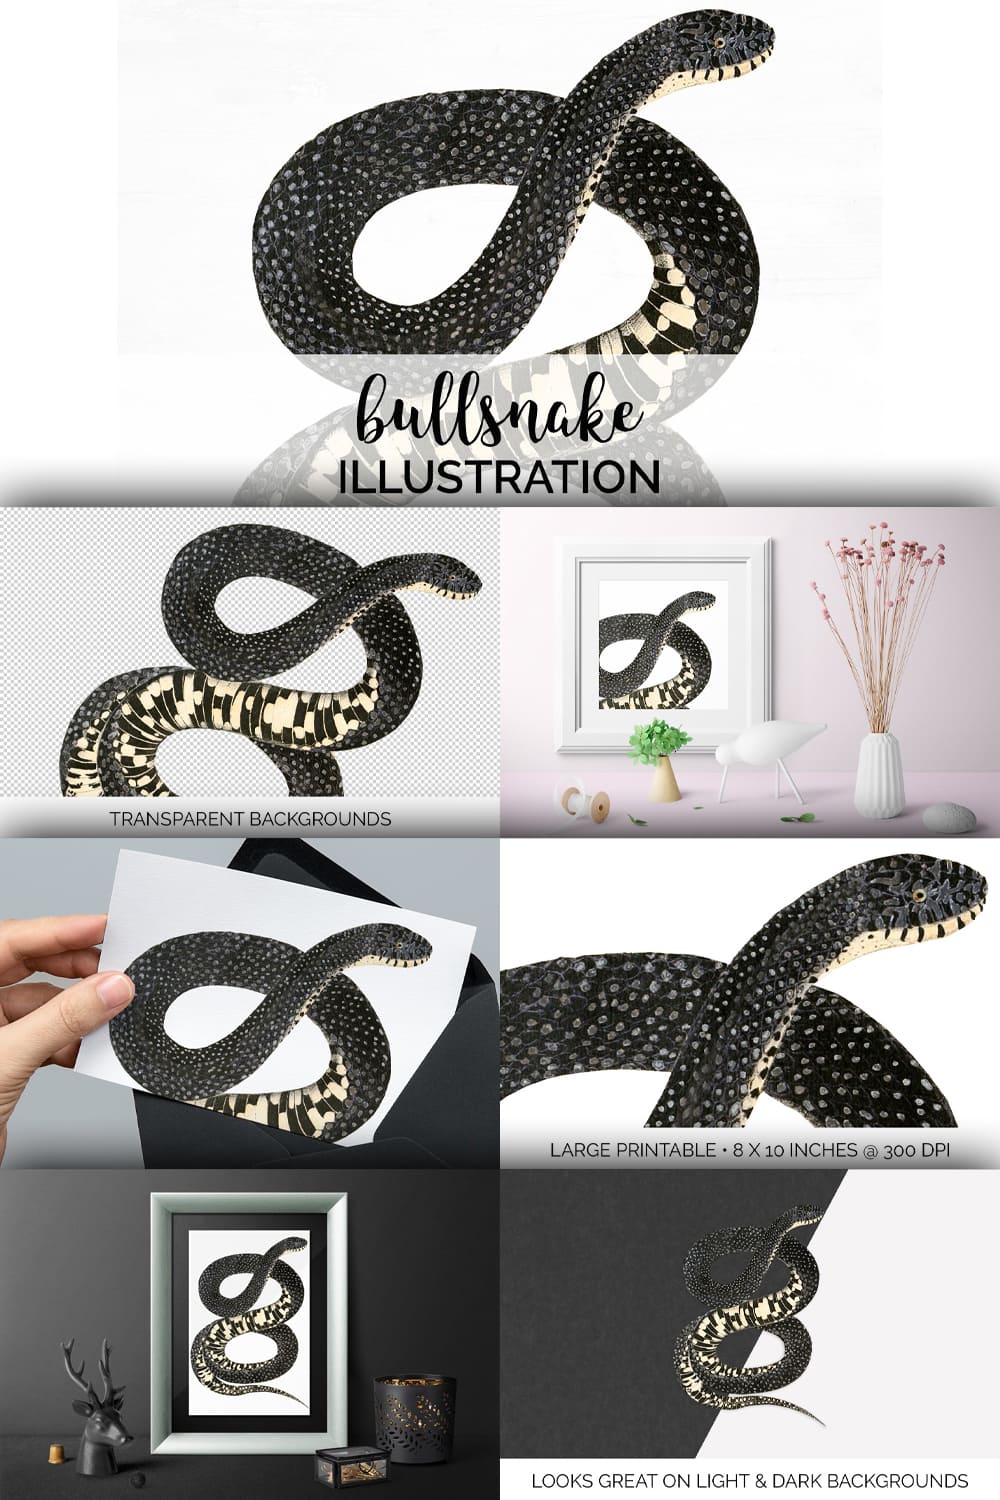 Collection of colorful images bullsnake.